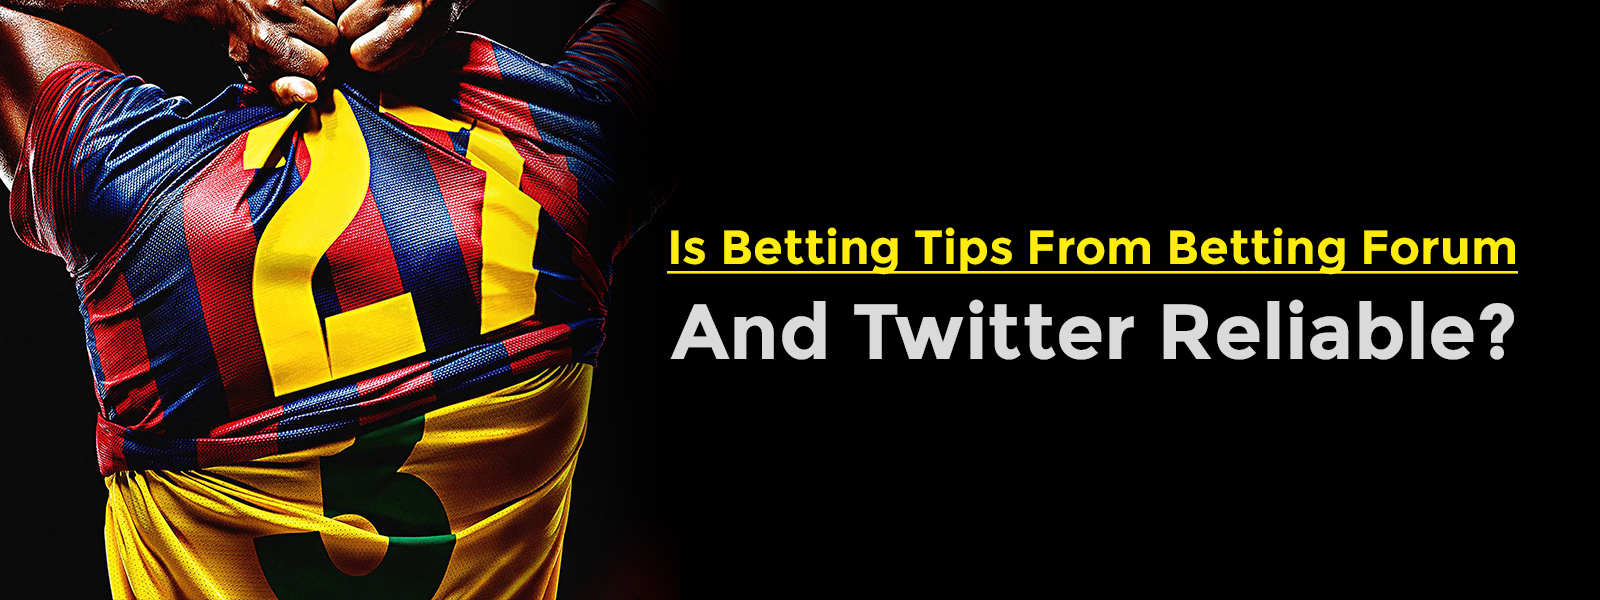 Is Betting Tips From Betting Forum And Twitter Reliable?